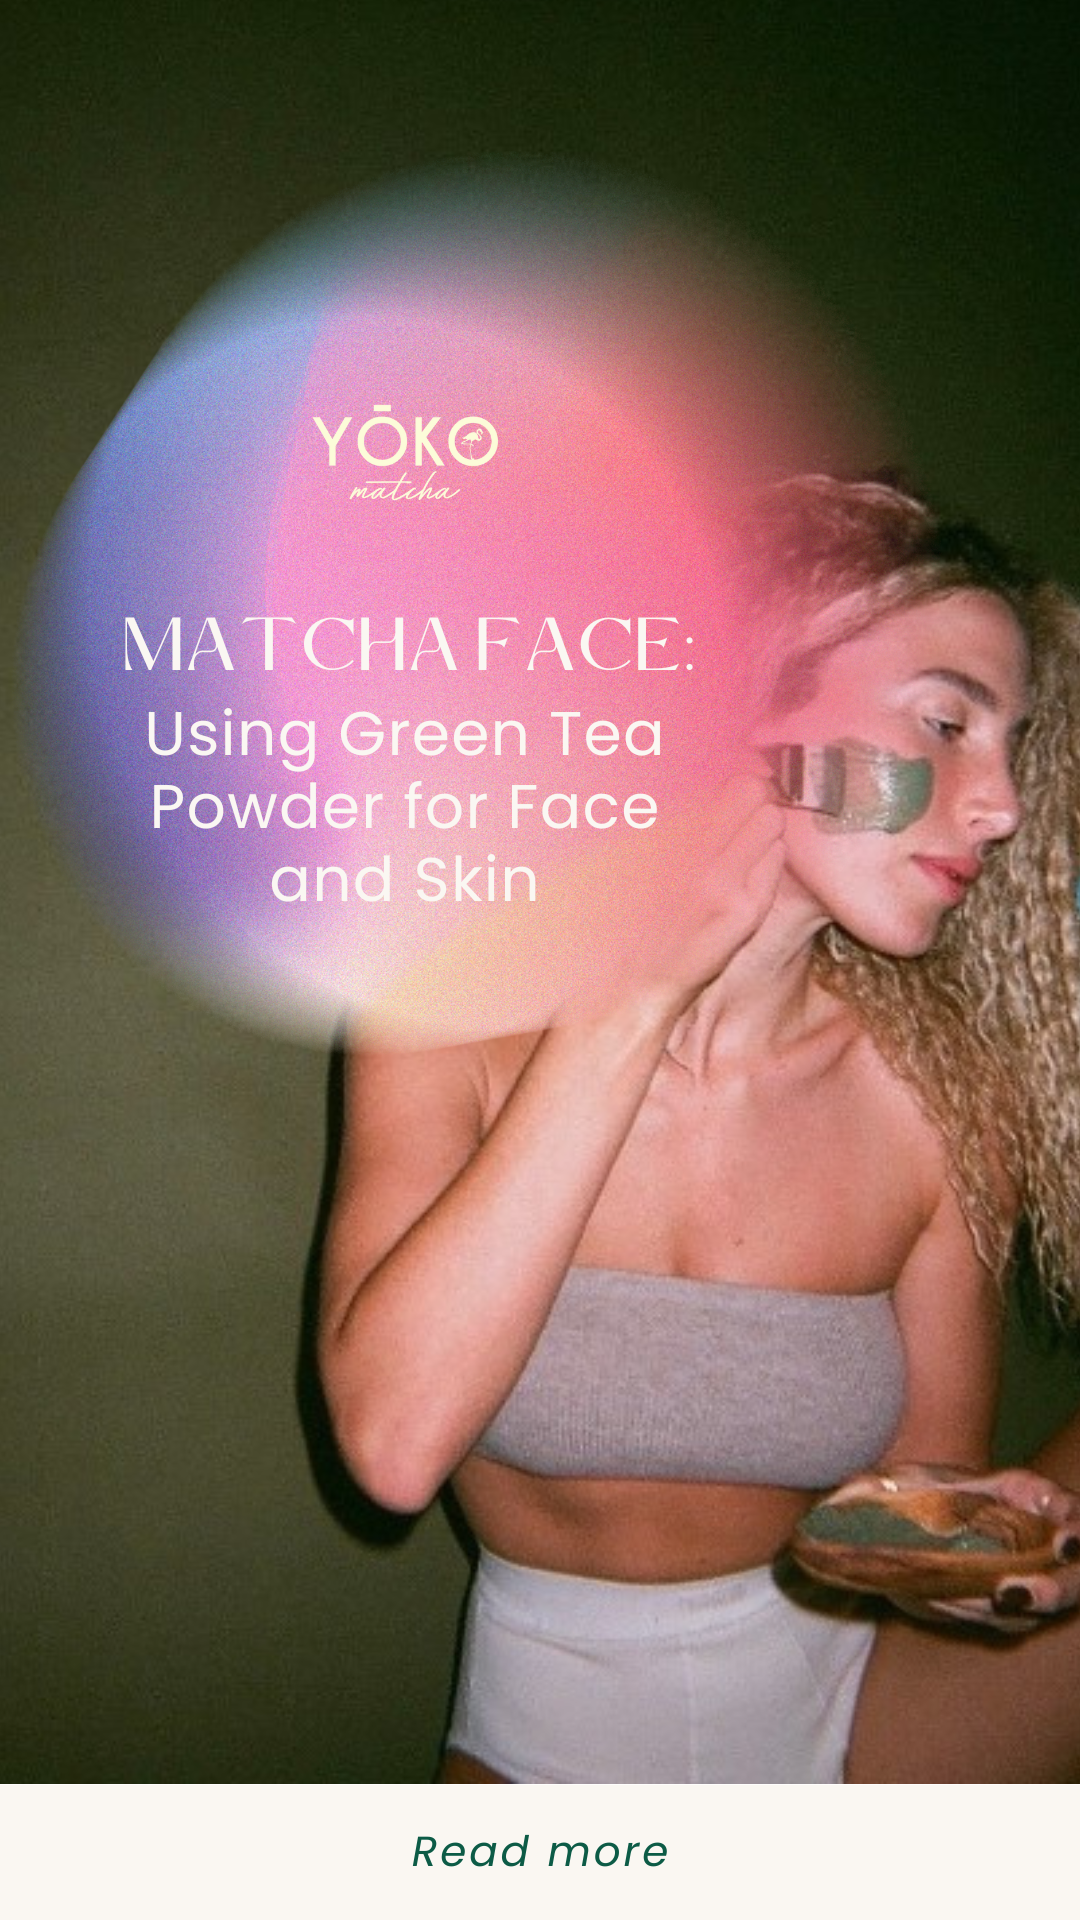 Matcha Face: Using Green Tea Powder for Face and Skin